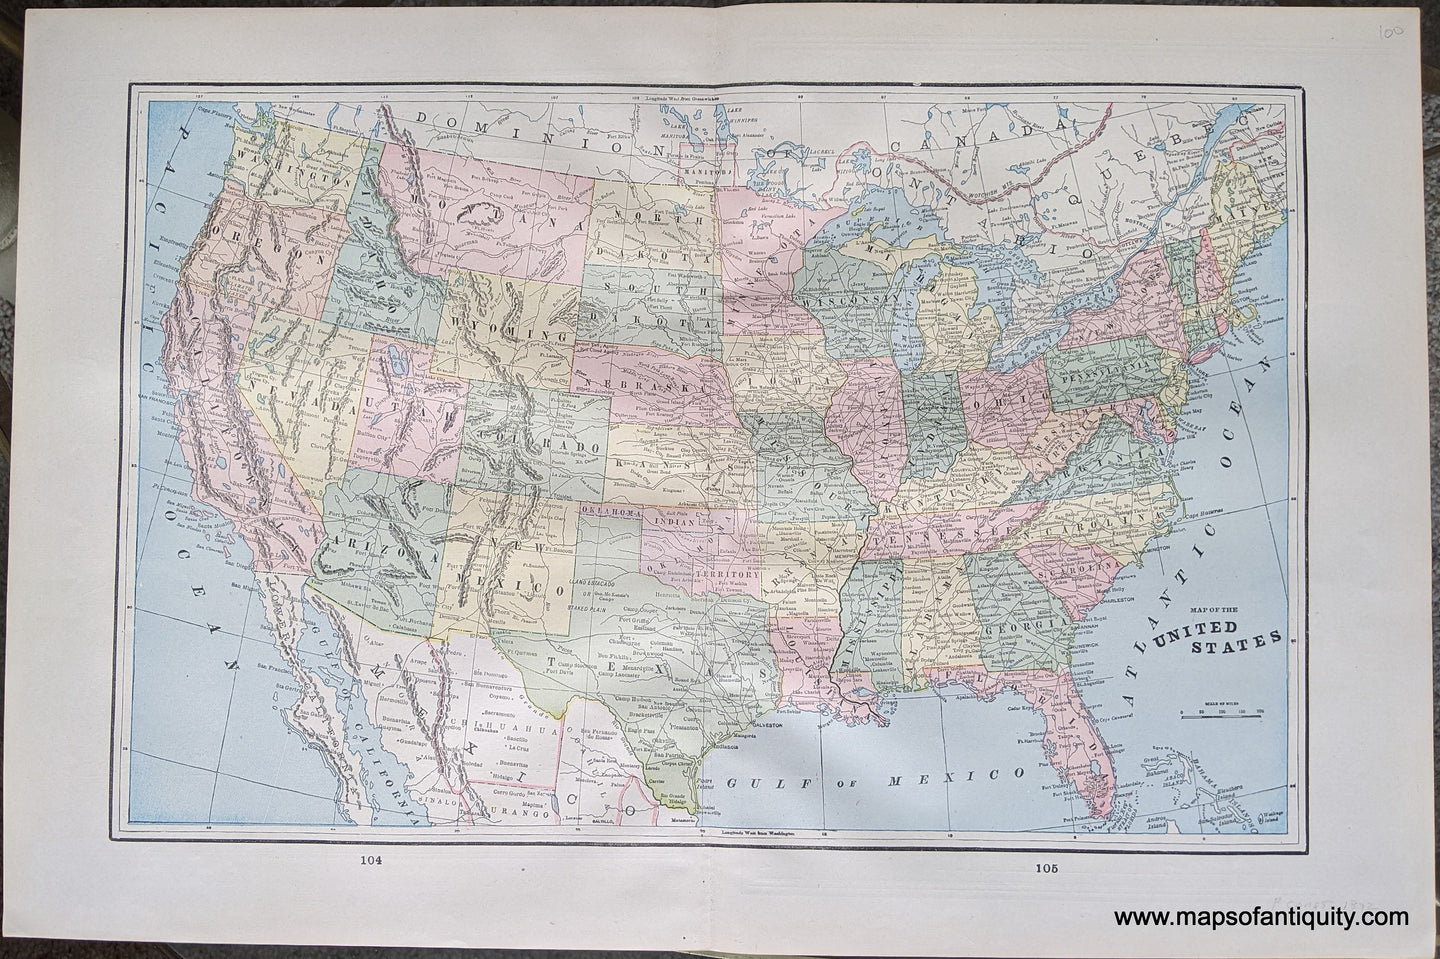 Genuine-Antique-Printed-Color-Comparative-Chart-Map-of-the-United-States;-versos:-Manitoba-&-Maine-United-States--1892-Home-Library-&-Supply-Association-Maps-Of-Antiquity-1800s-19th-century